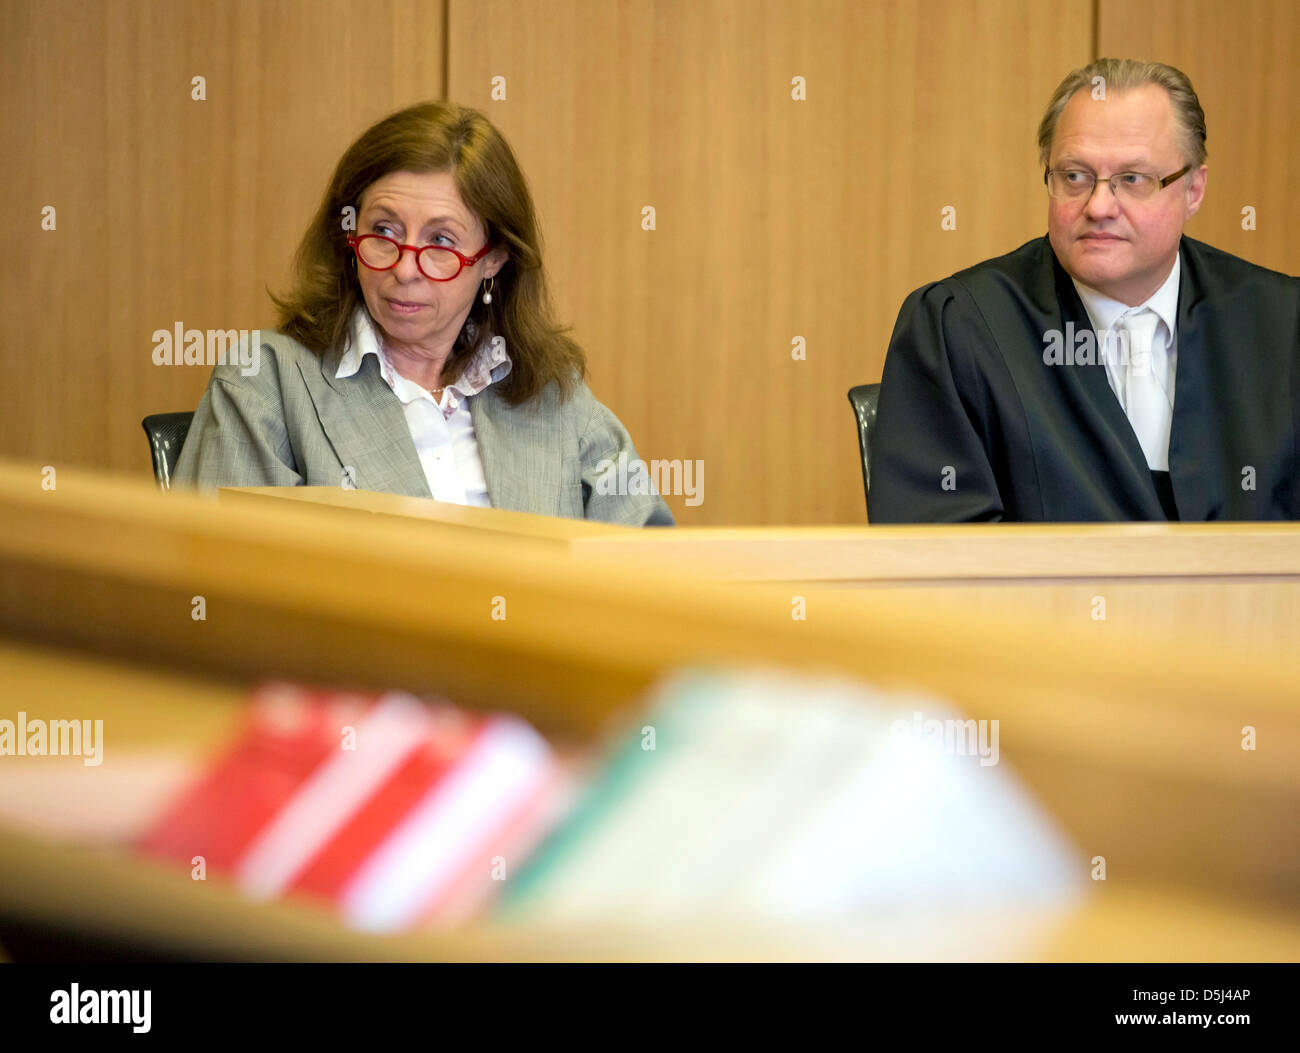 The plaintiff sits next to her lawyer Joachim gaertner before the announcement of the verdict in a acourt room of the German Fedral Labour Court in Leipzig, Germany, 14 November 2012. The Federal Labour Court ruled that employess have to hand in a medical certificate on the first day of their sick leave, if the empoyer so demands. Photo: Michael Reichel Stock Photo